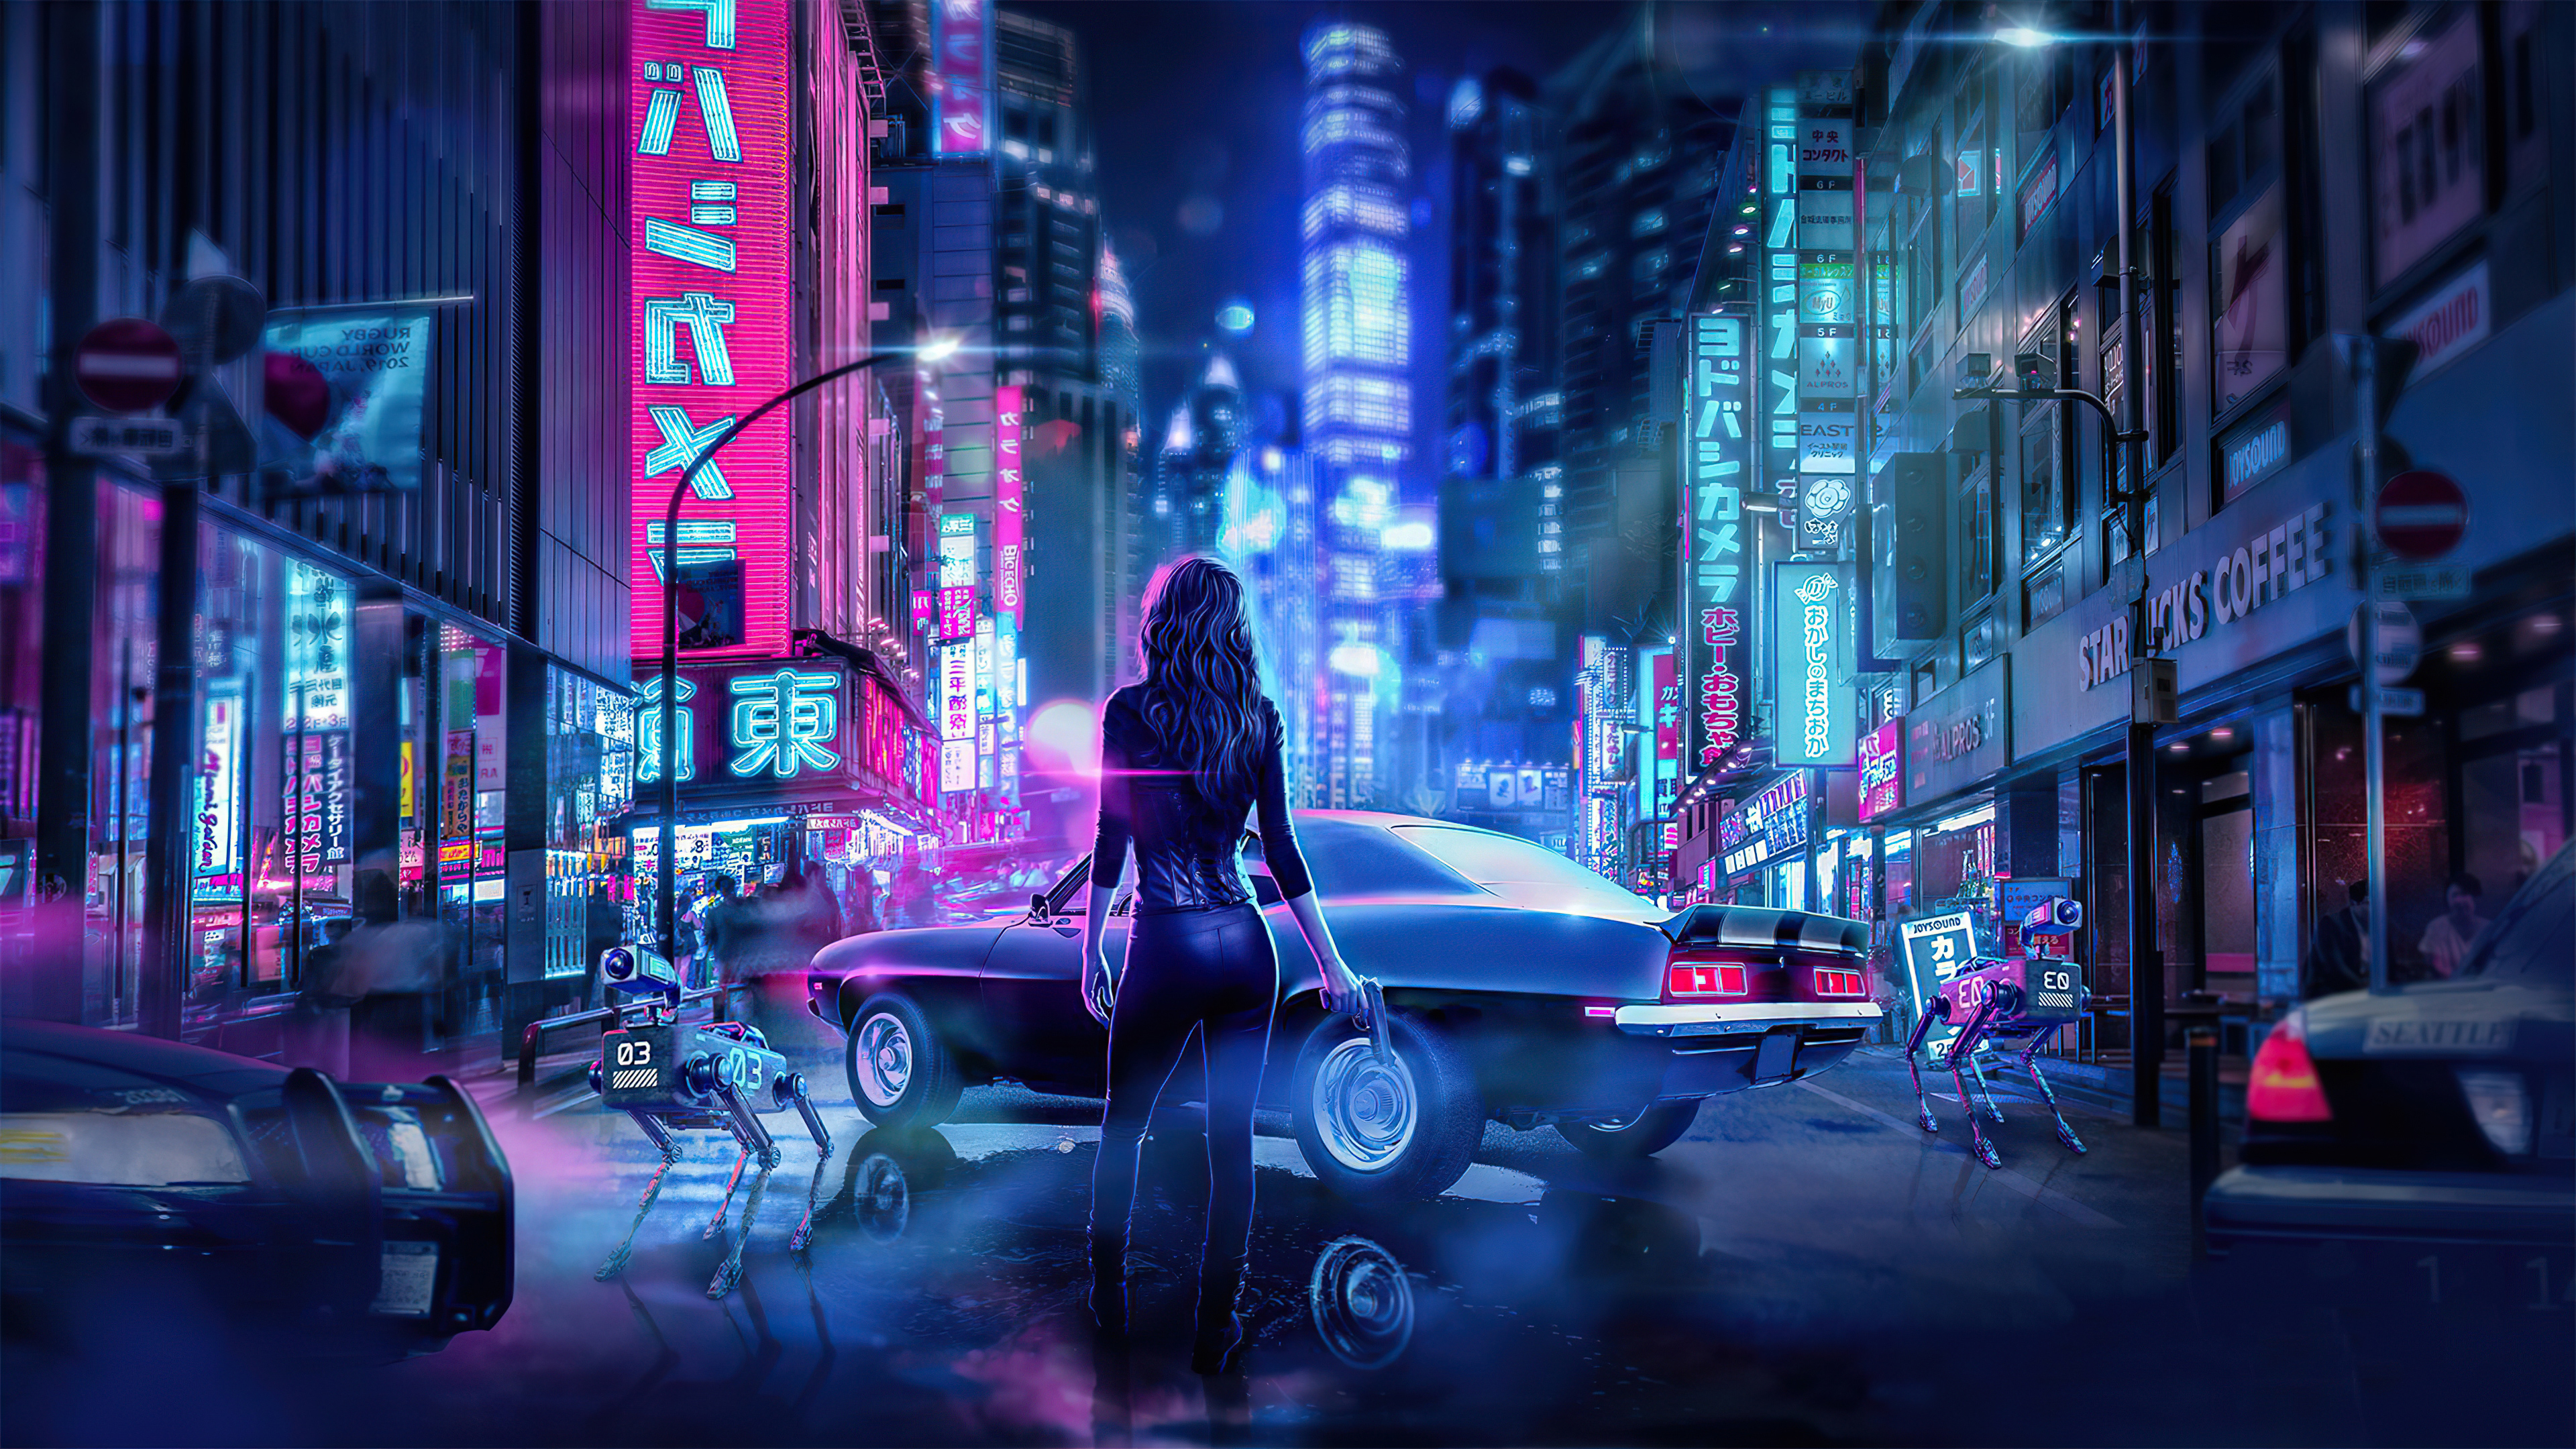 3840x2160 2560x1600 Cyber Japan Neon Lights Girl With Gun 4k 2560x1600 Resolution HD 4k Wallpapers, Images, Backgrounds, Photos and Pictures